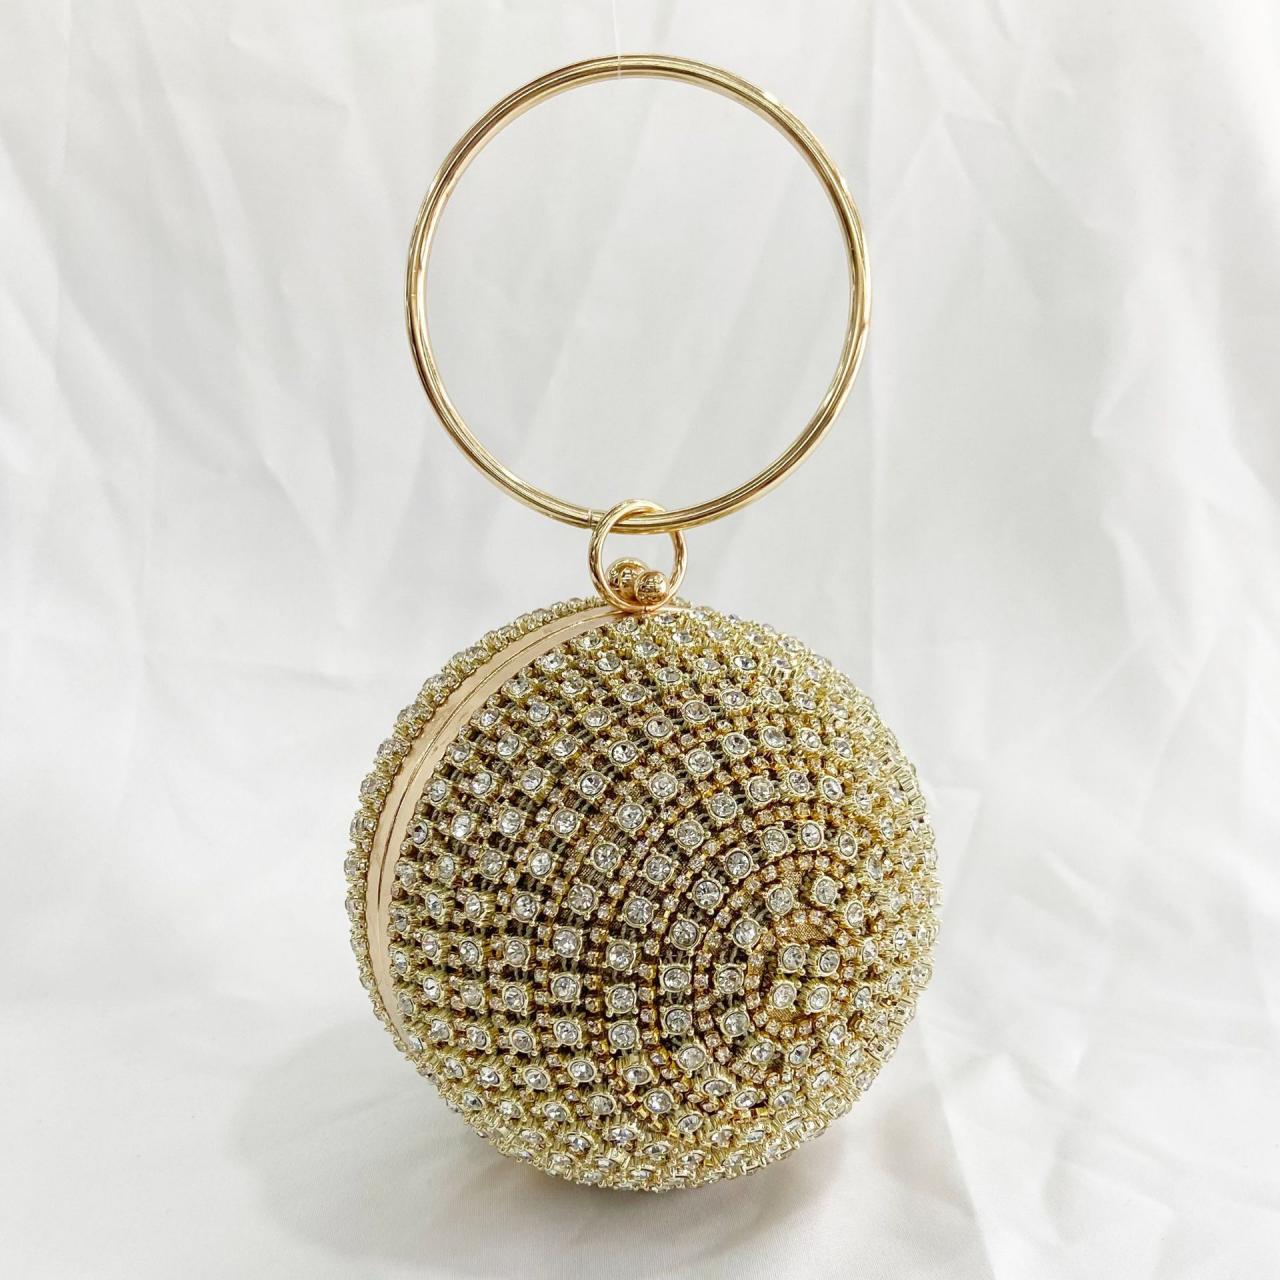 Luxurious Golden Crystal Sphere Clutch With Elegant Ring Handle